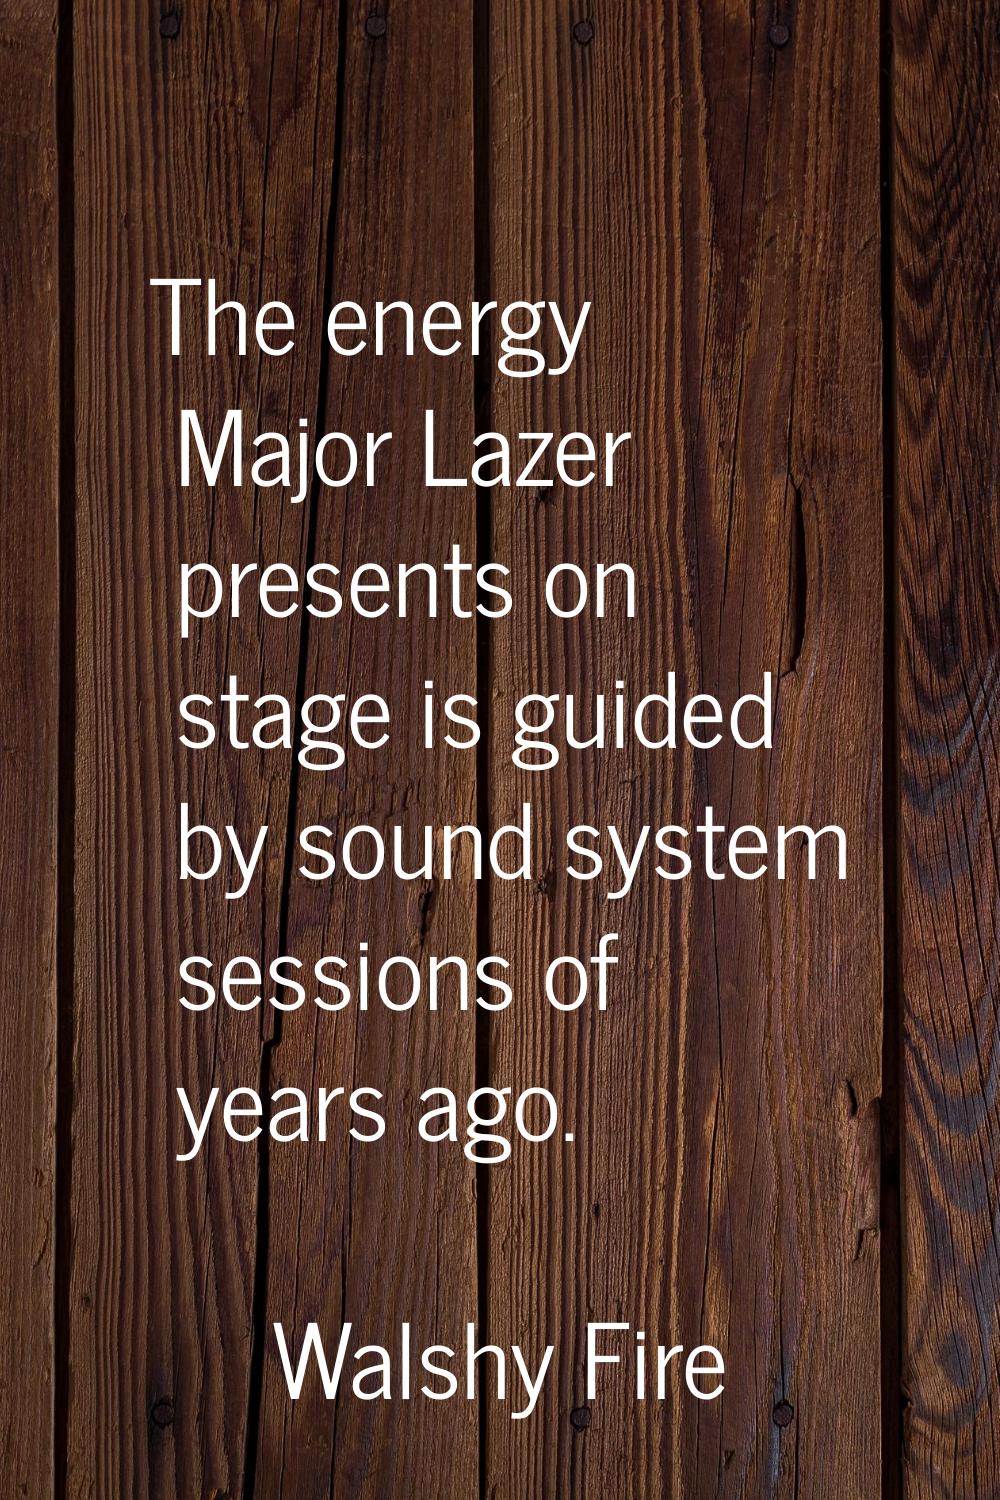 The energy Major Lazer presents on stage is guided by sound system sessions of years ago.